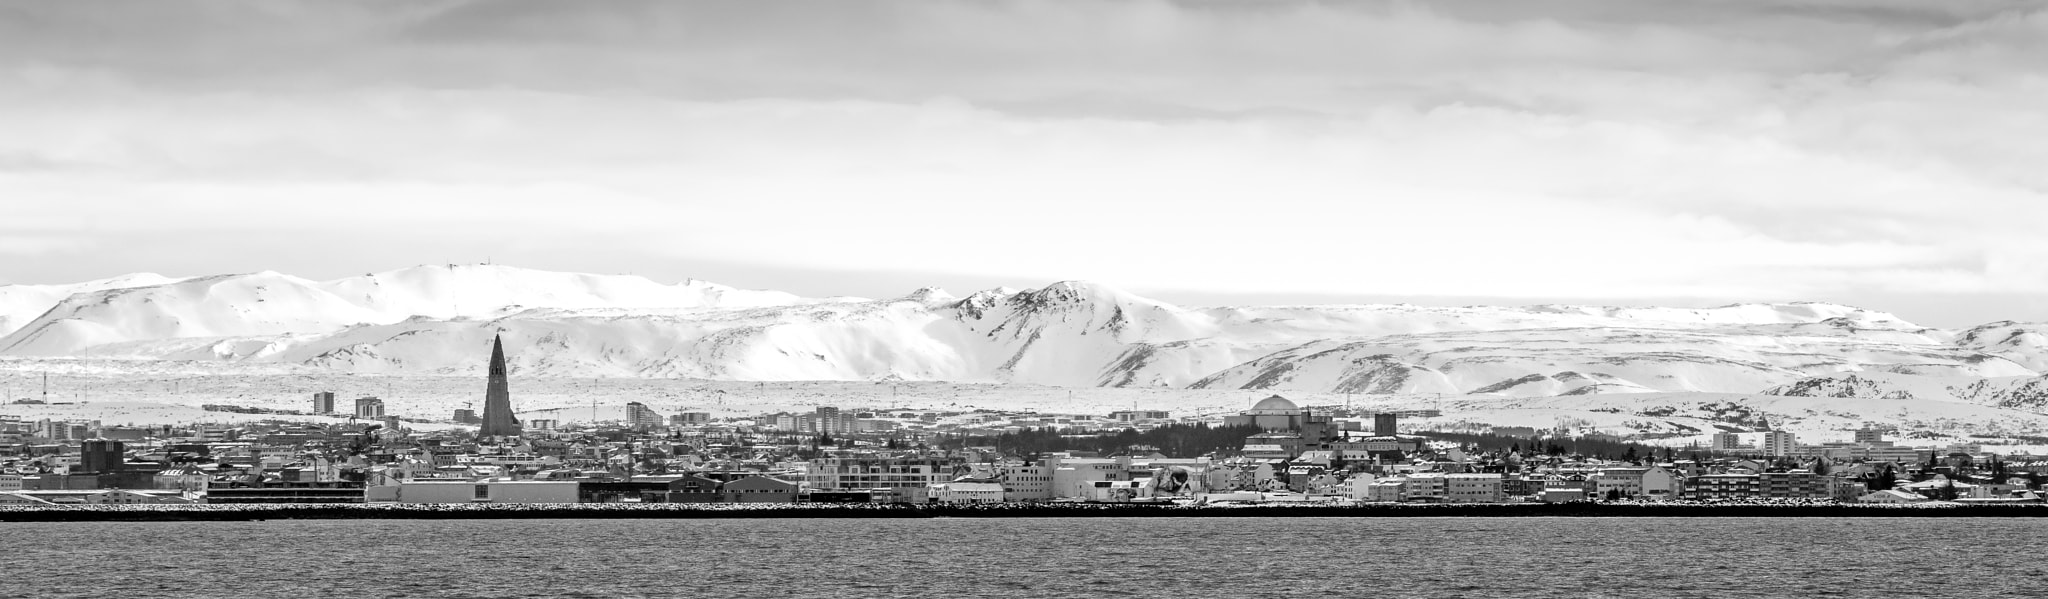 Pentax K-1 sample photo. Reykjavik from the sea photography